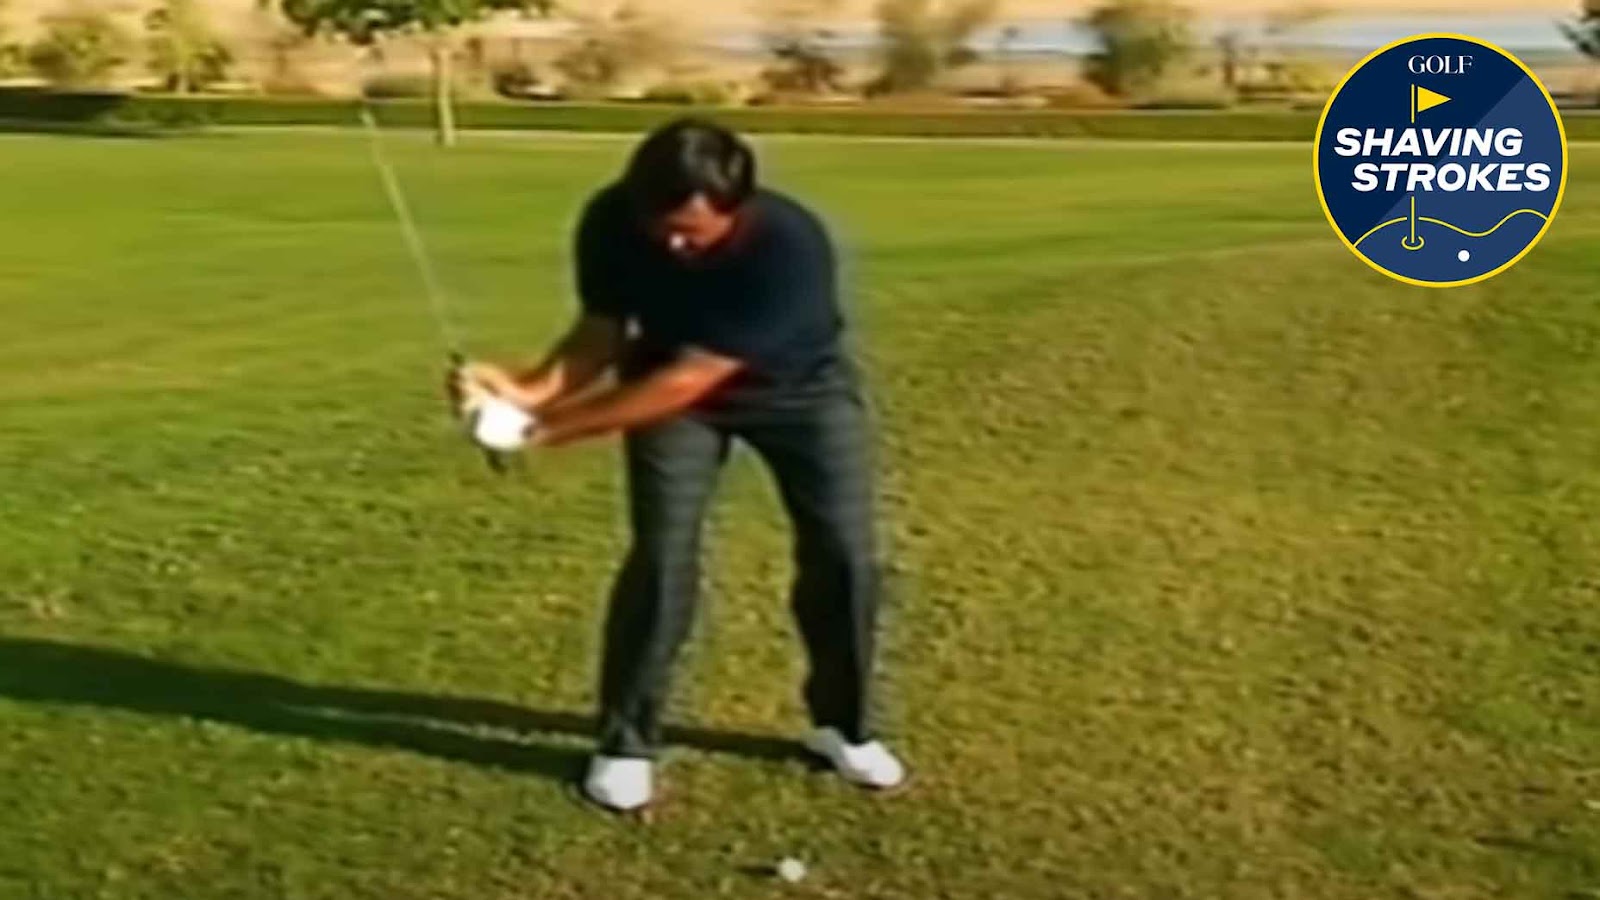 5-time major champion Seve Ballesteros was a short game maestro, and this timeless video shows his tips for hitting a crispy flop shot